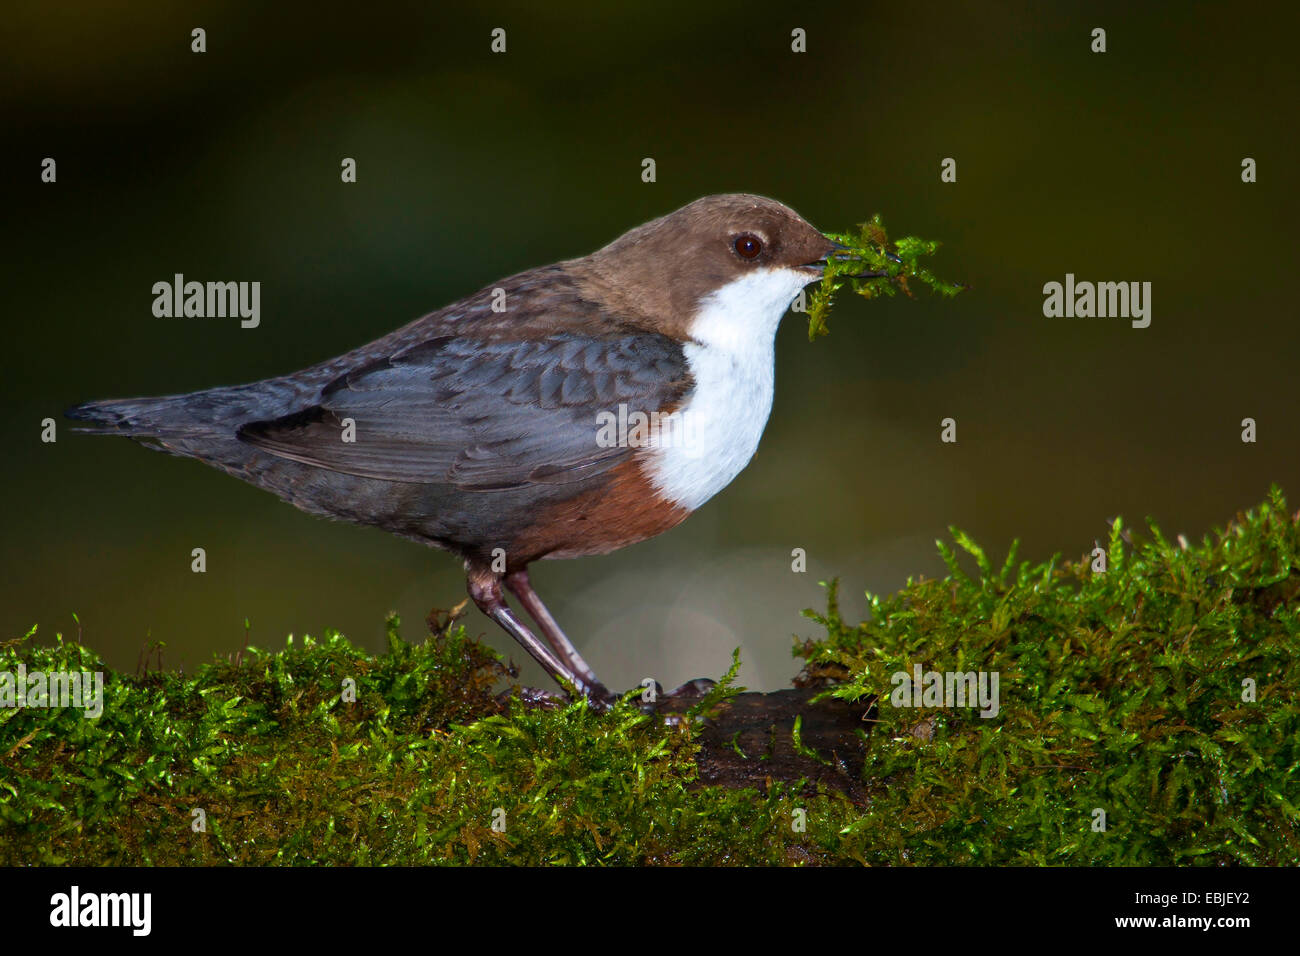 dipper (Cinclus cinclus), sitting on a mossy branch with nesting material in its beak, Switzerland, Sankt Gallen Stock Photo